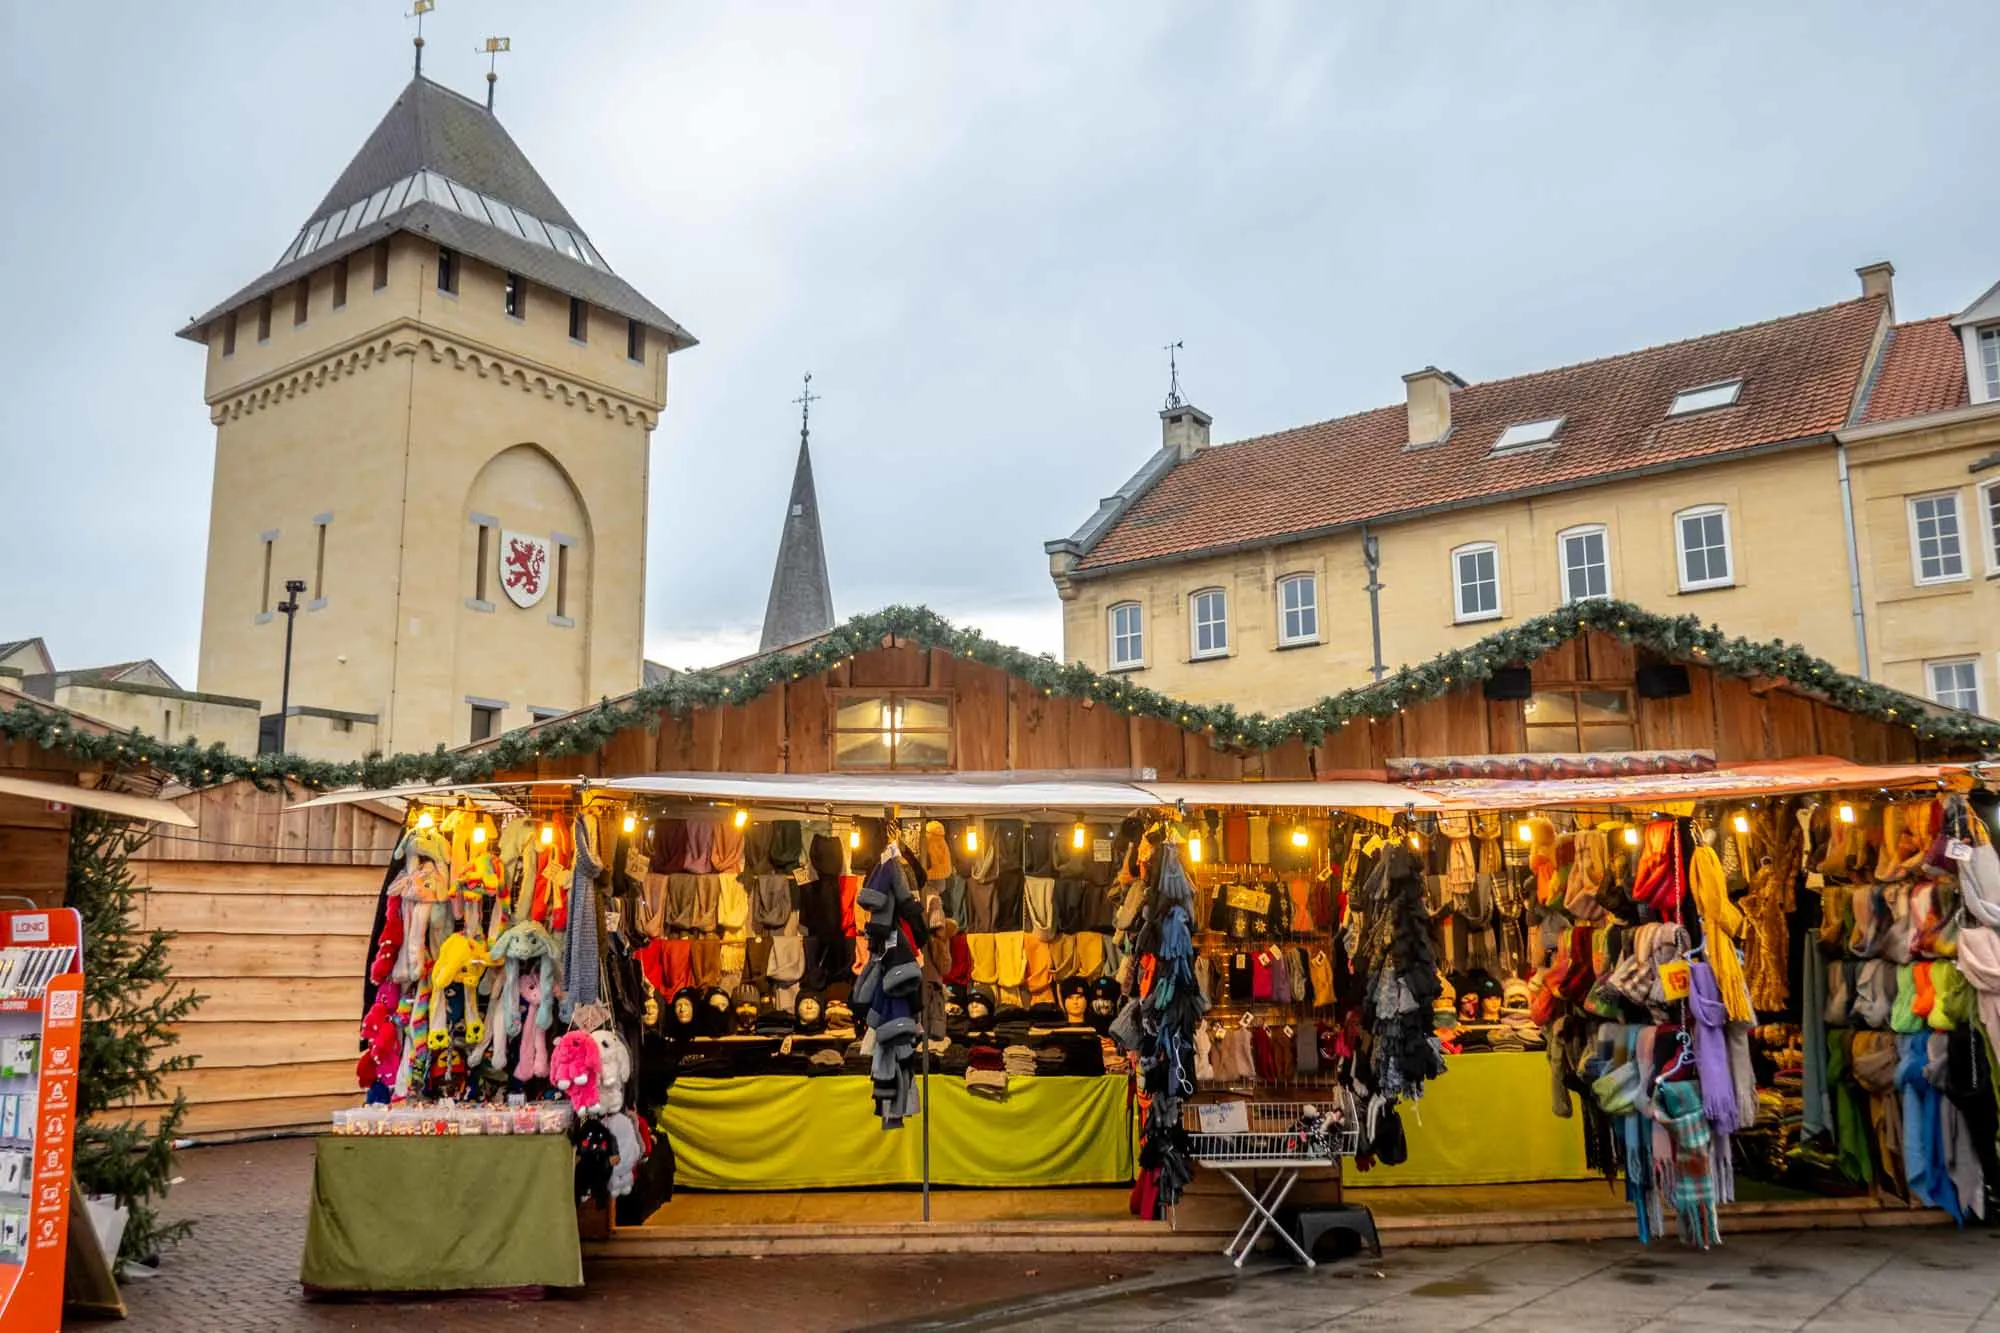 Wooden chalets filled with merchandise at a Christmas market.